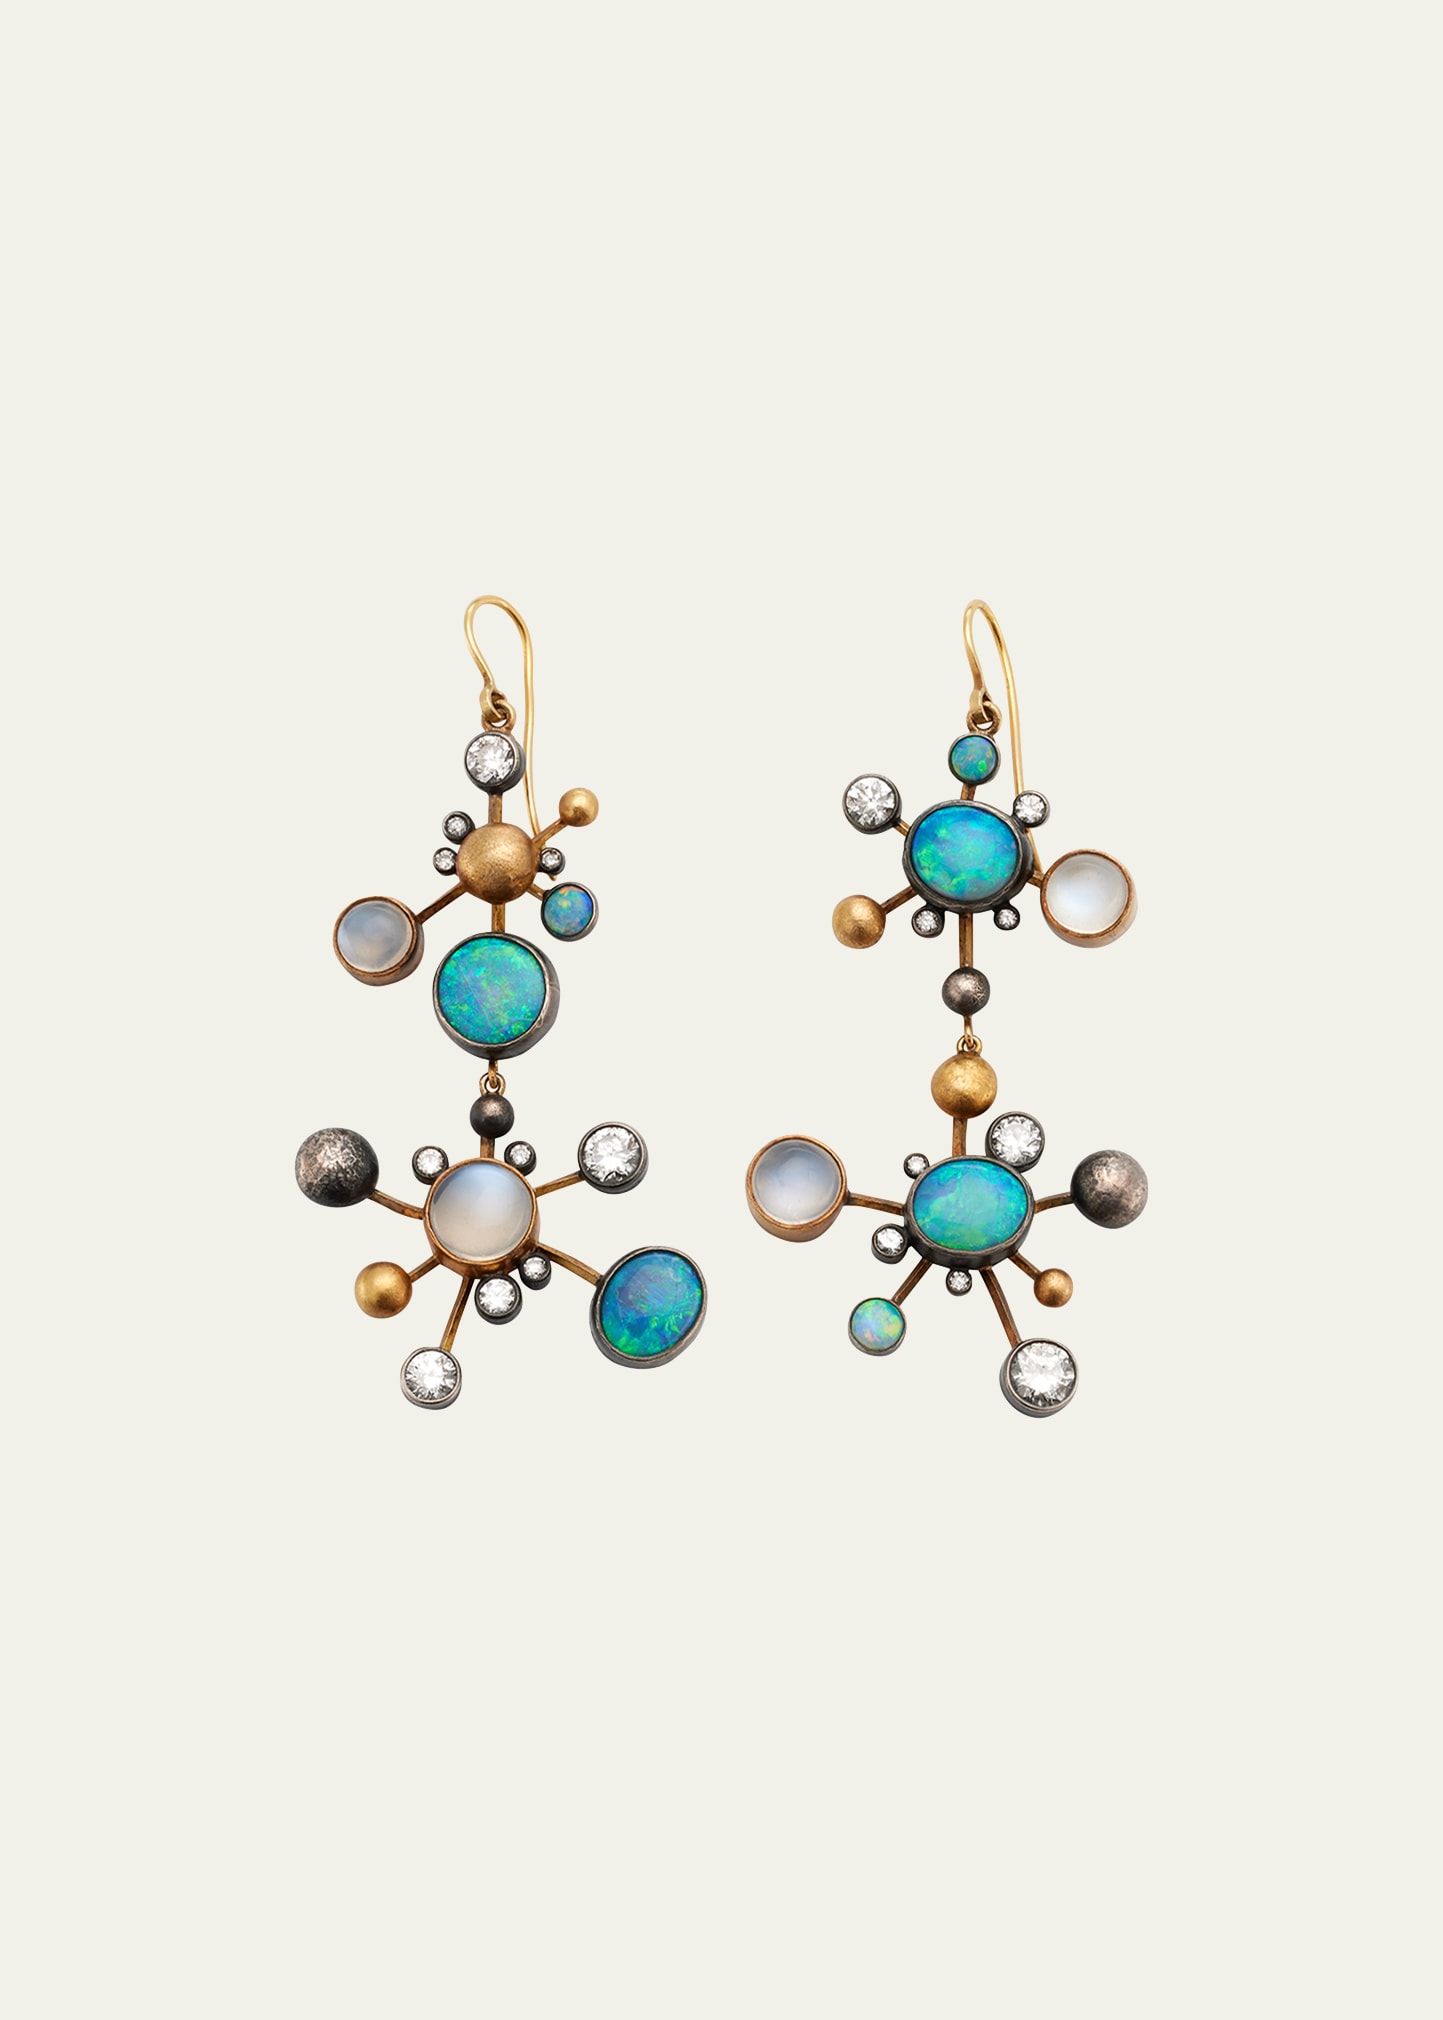 JUDY GEIB Dancing Cosmos Earrings with Opals, Diamonds and Moonstones